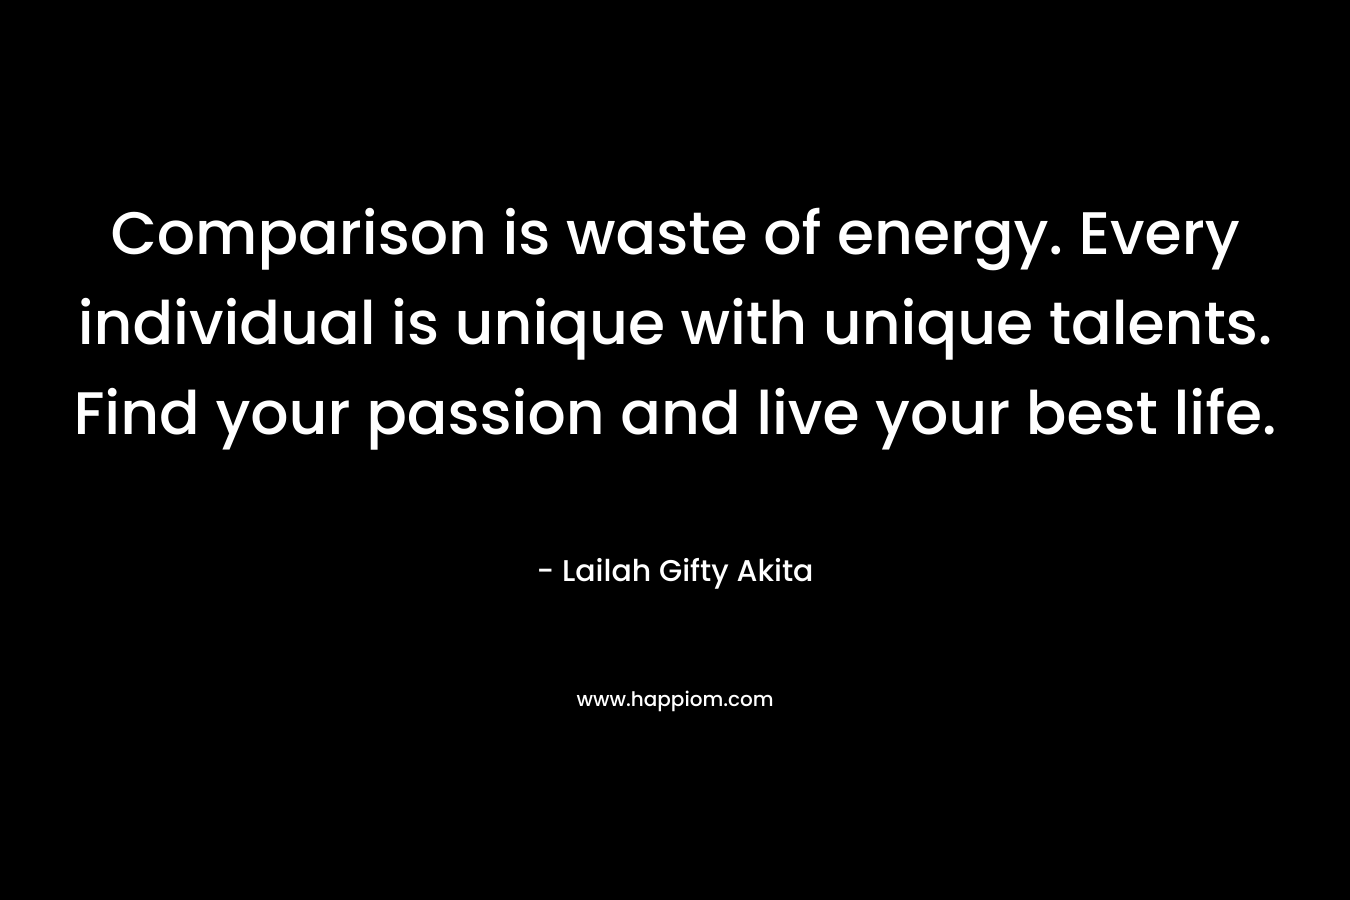 Comparison is waste of energy. Every individual is unique with unique talents. Find your passion and live your best life.